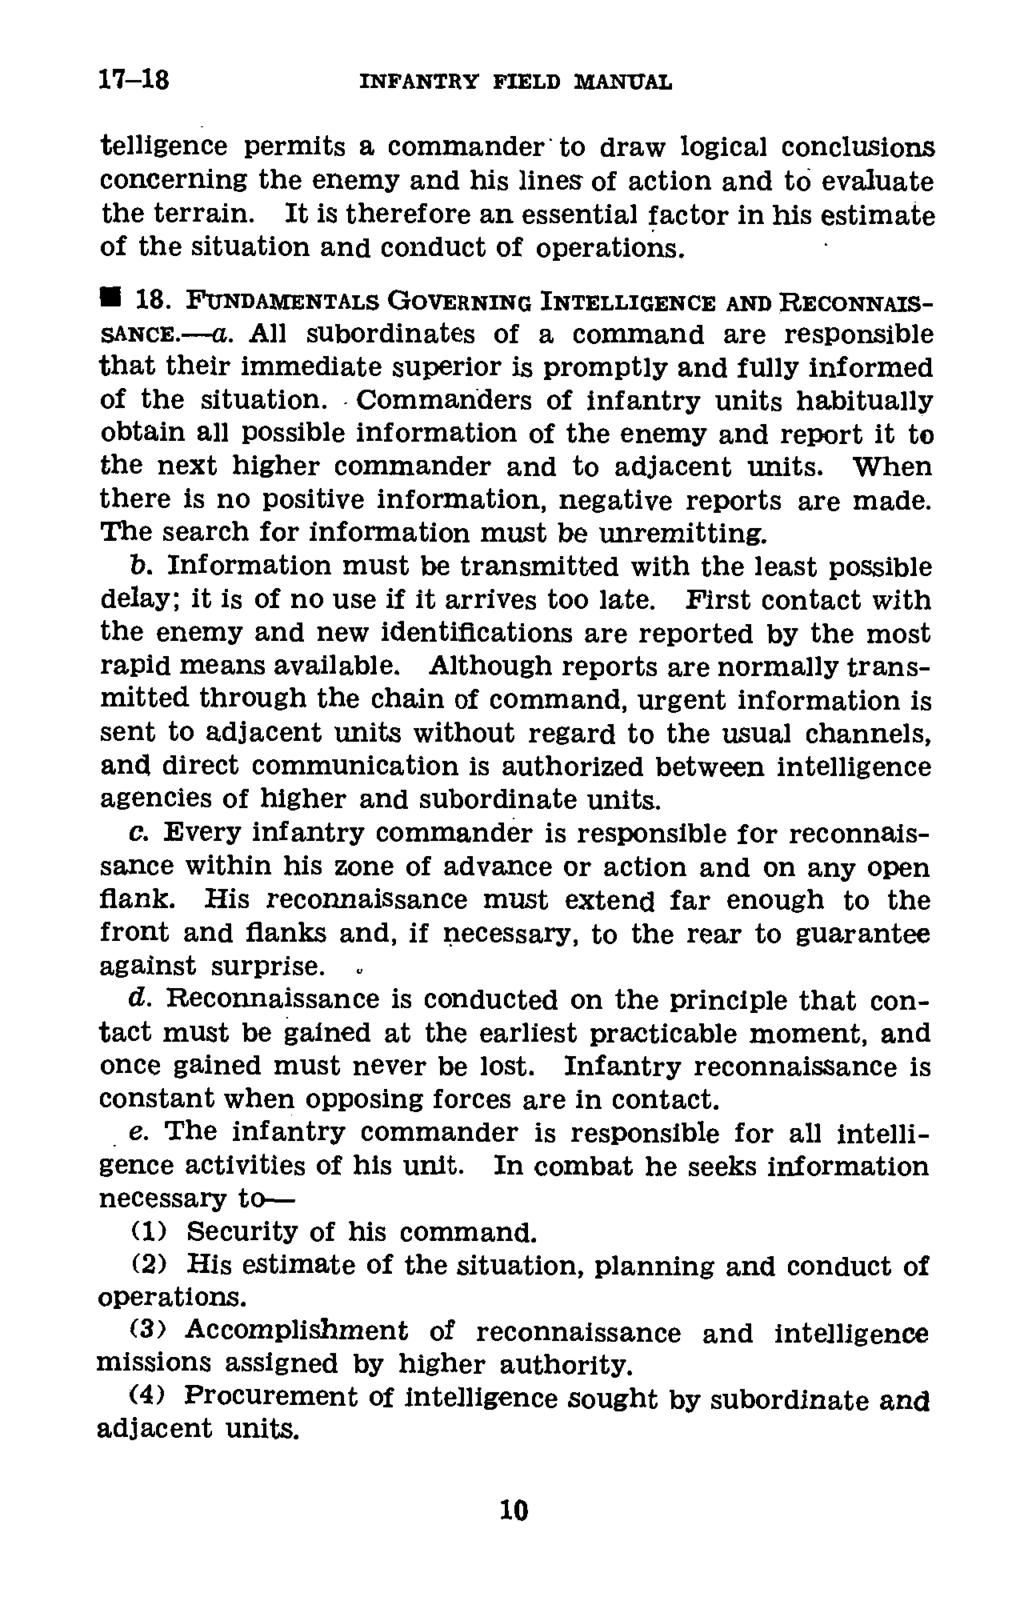 17-18 INFANTRY FIELD MANUAL telligence permits a commander' to draw logical conclusions concerning the enemy and his lines of action and to evaluate the terrain.